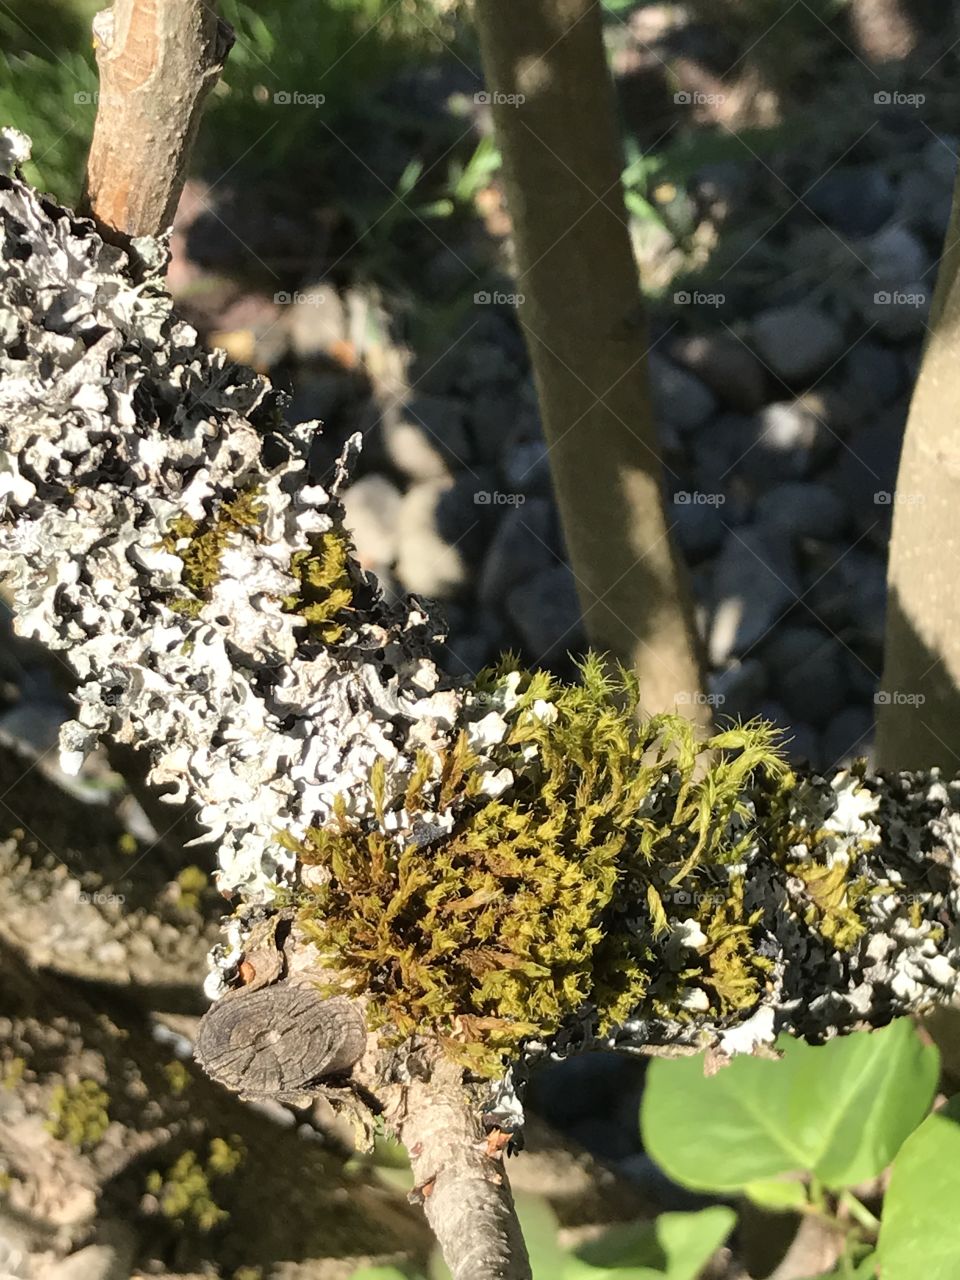 Moss on an old tree branch